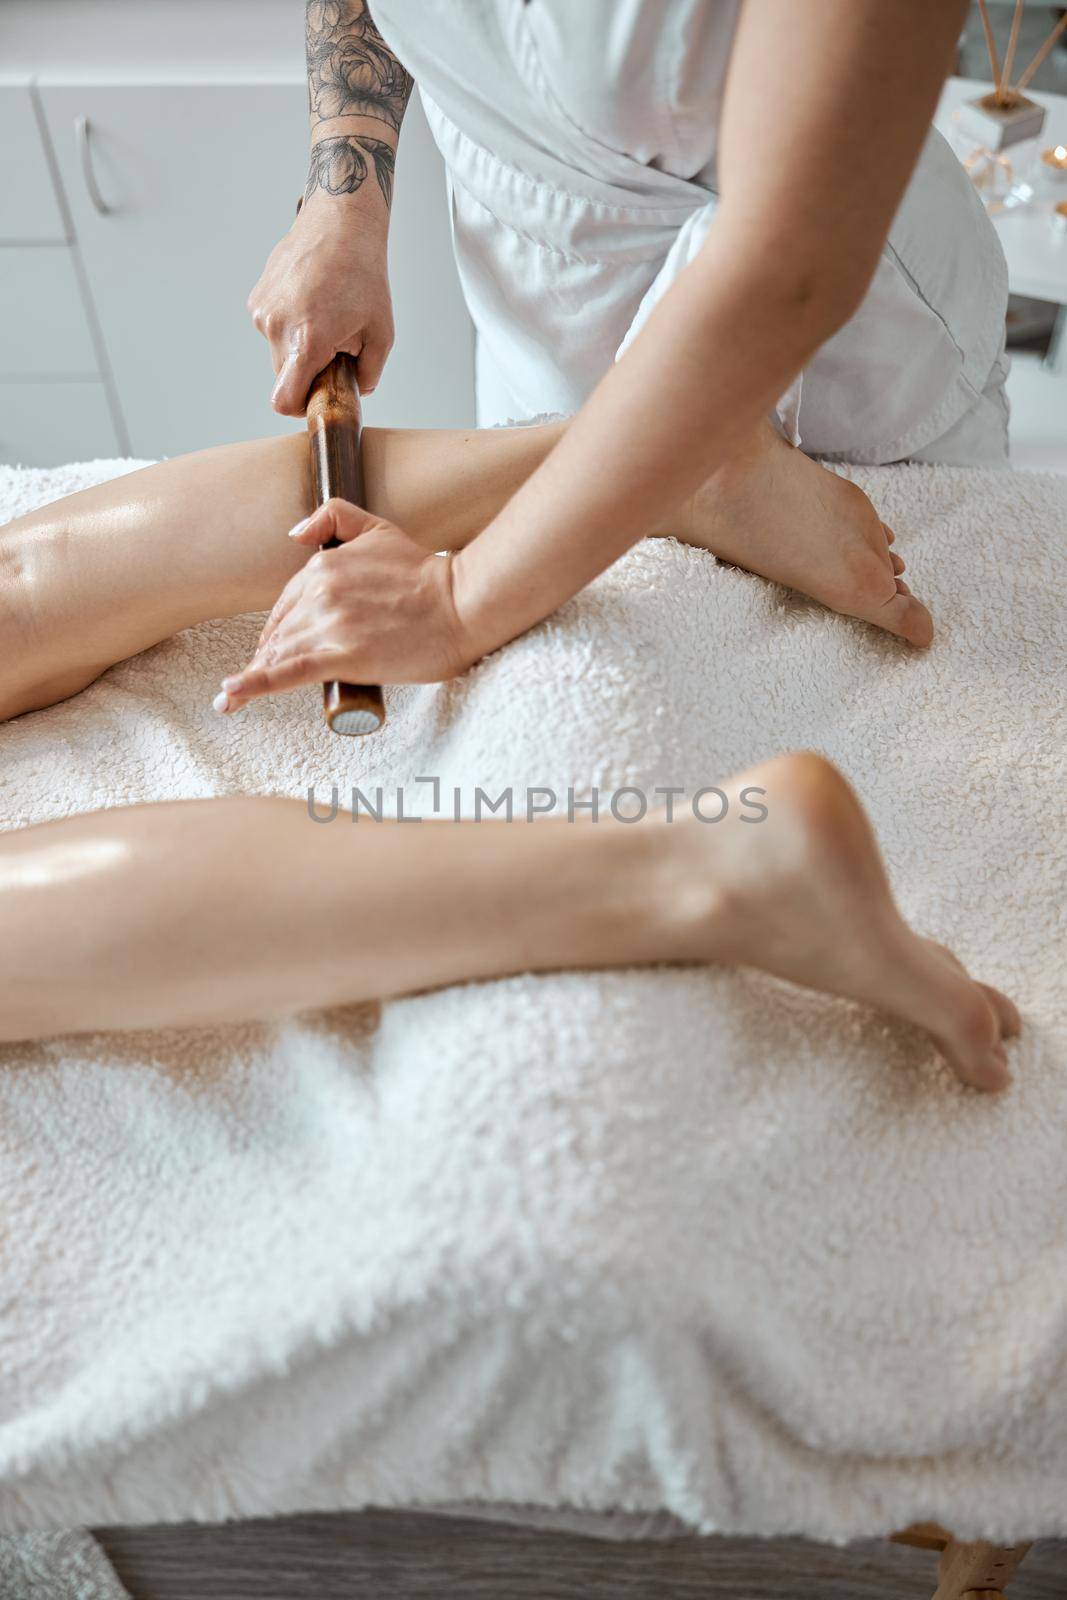 Conident female specialist is doing leg massage with bamboo stick to beautiful caucasean woman client